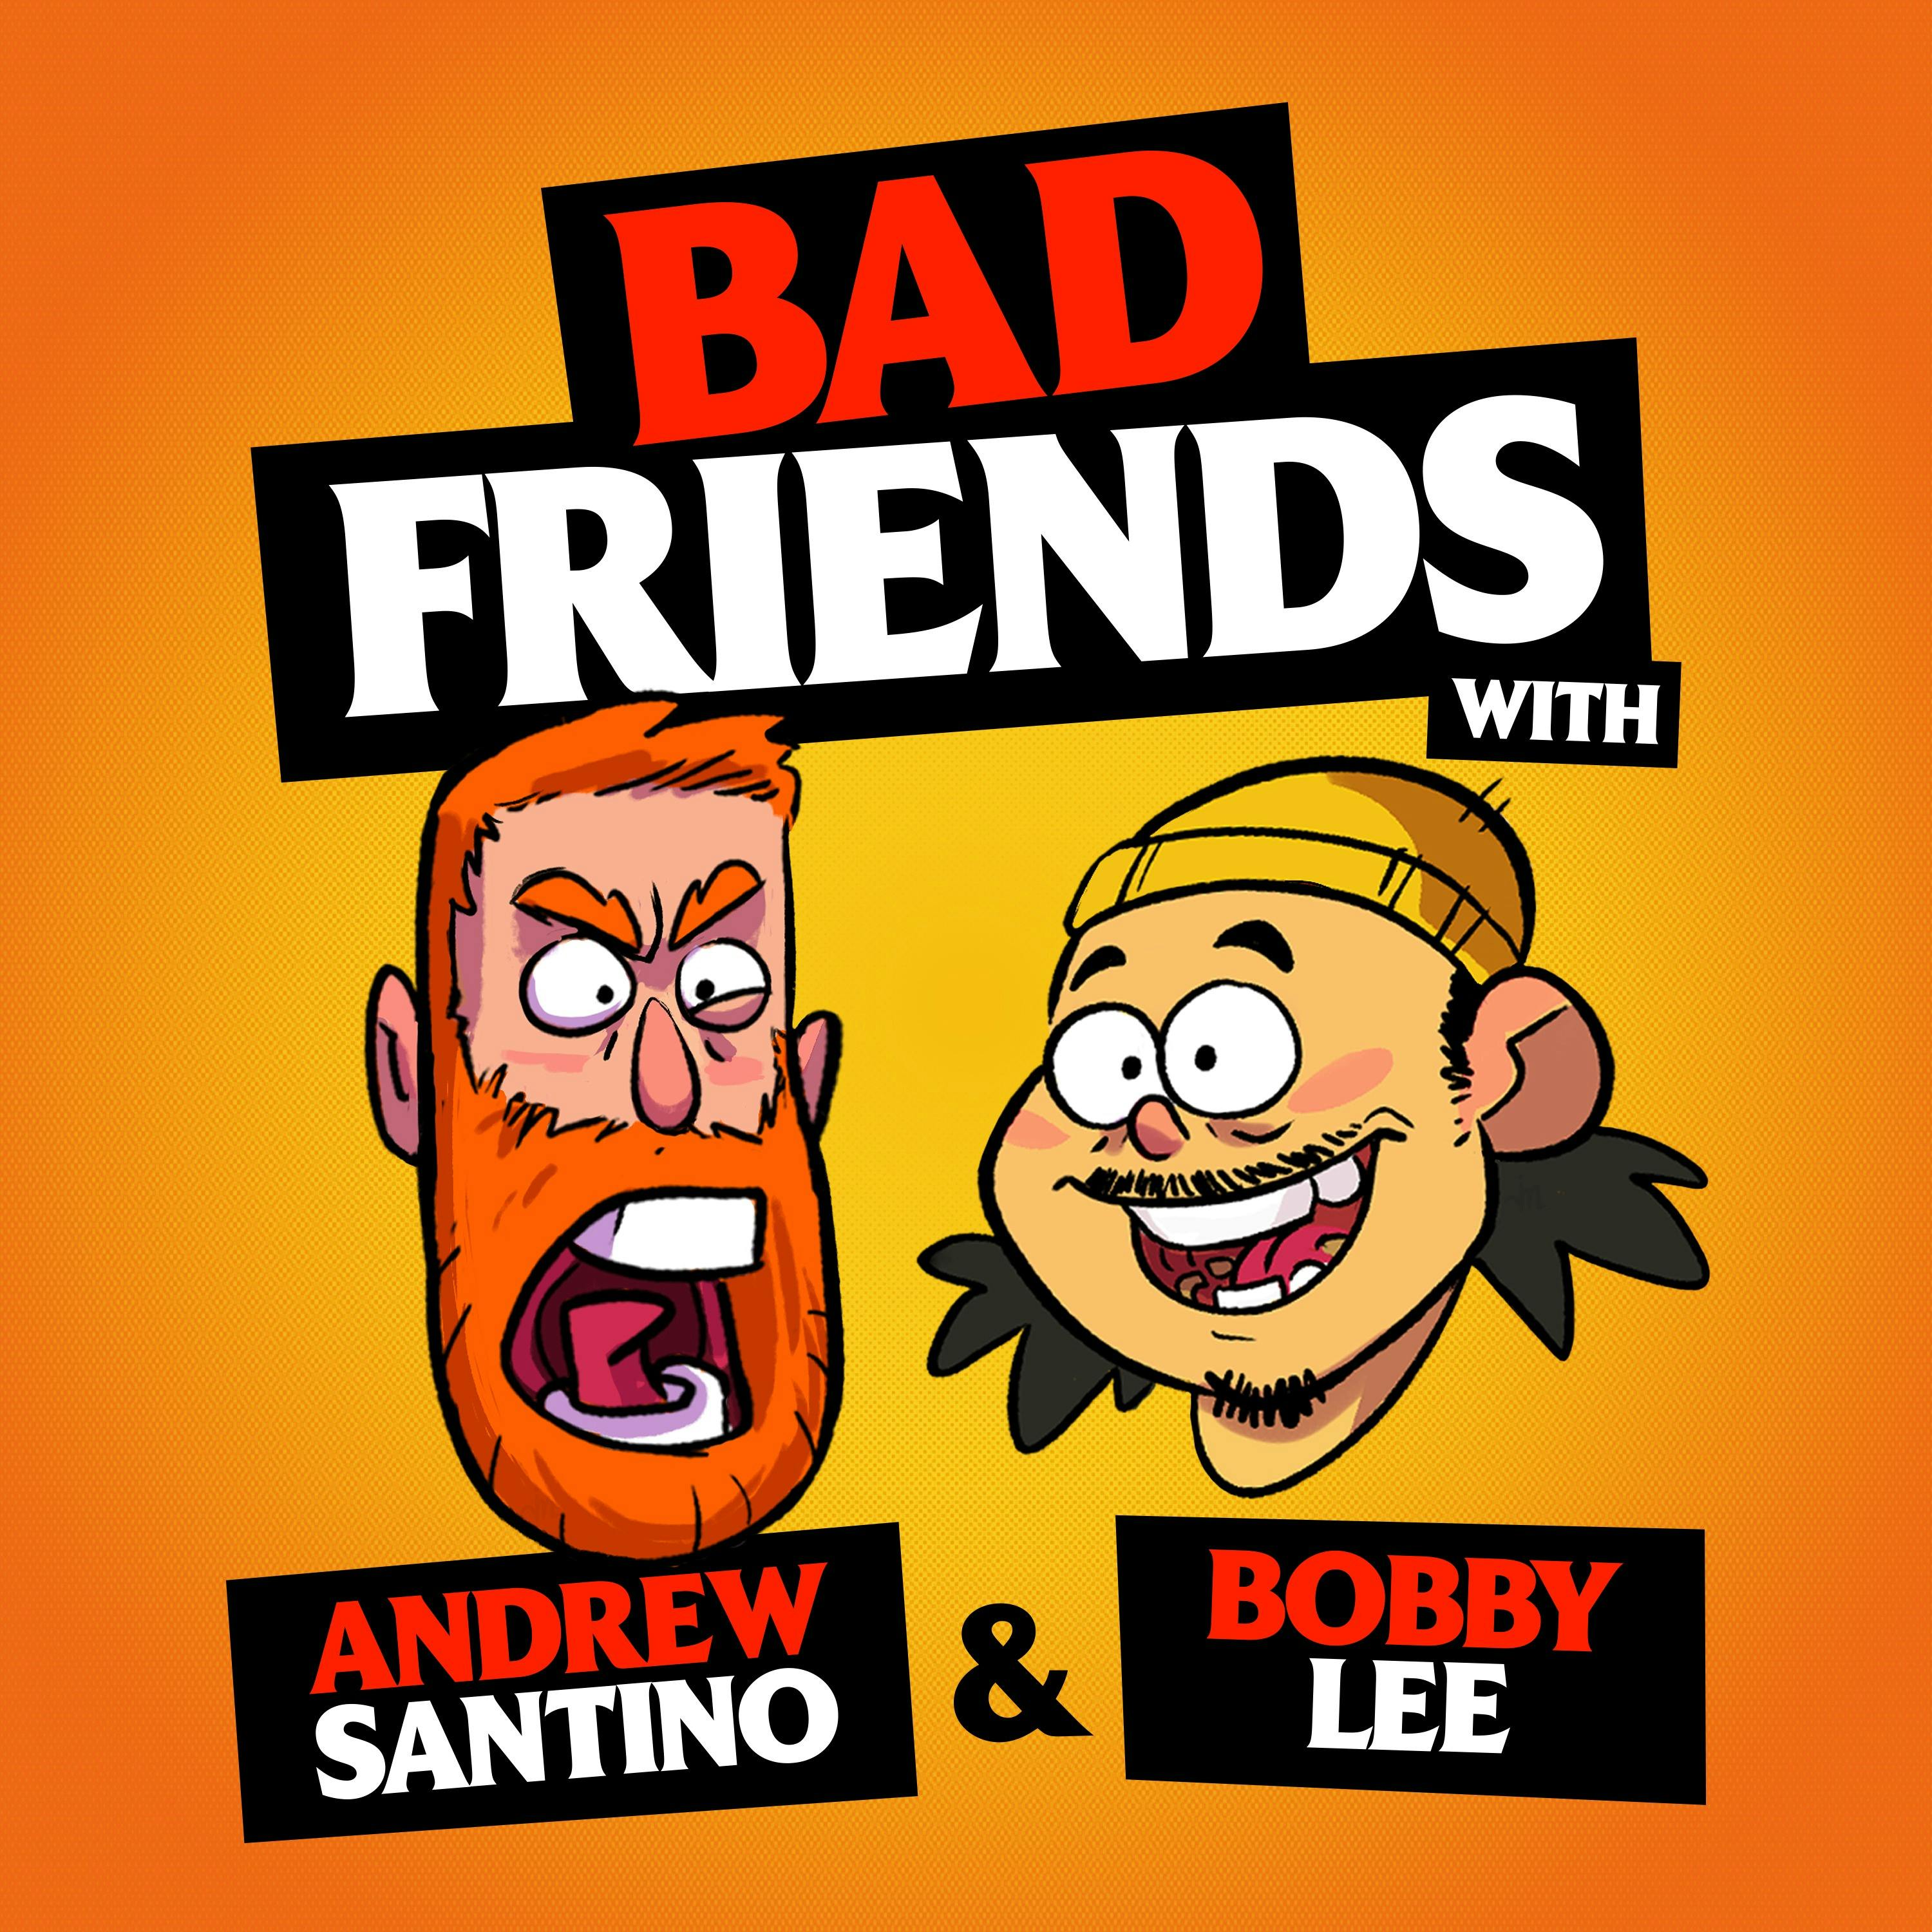 KATS and Hey Babe Clap Back by Andrew Santino and Bobby Lee